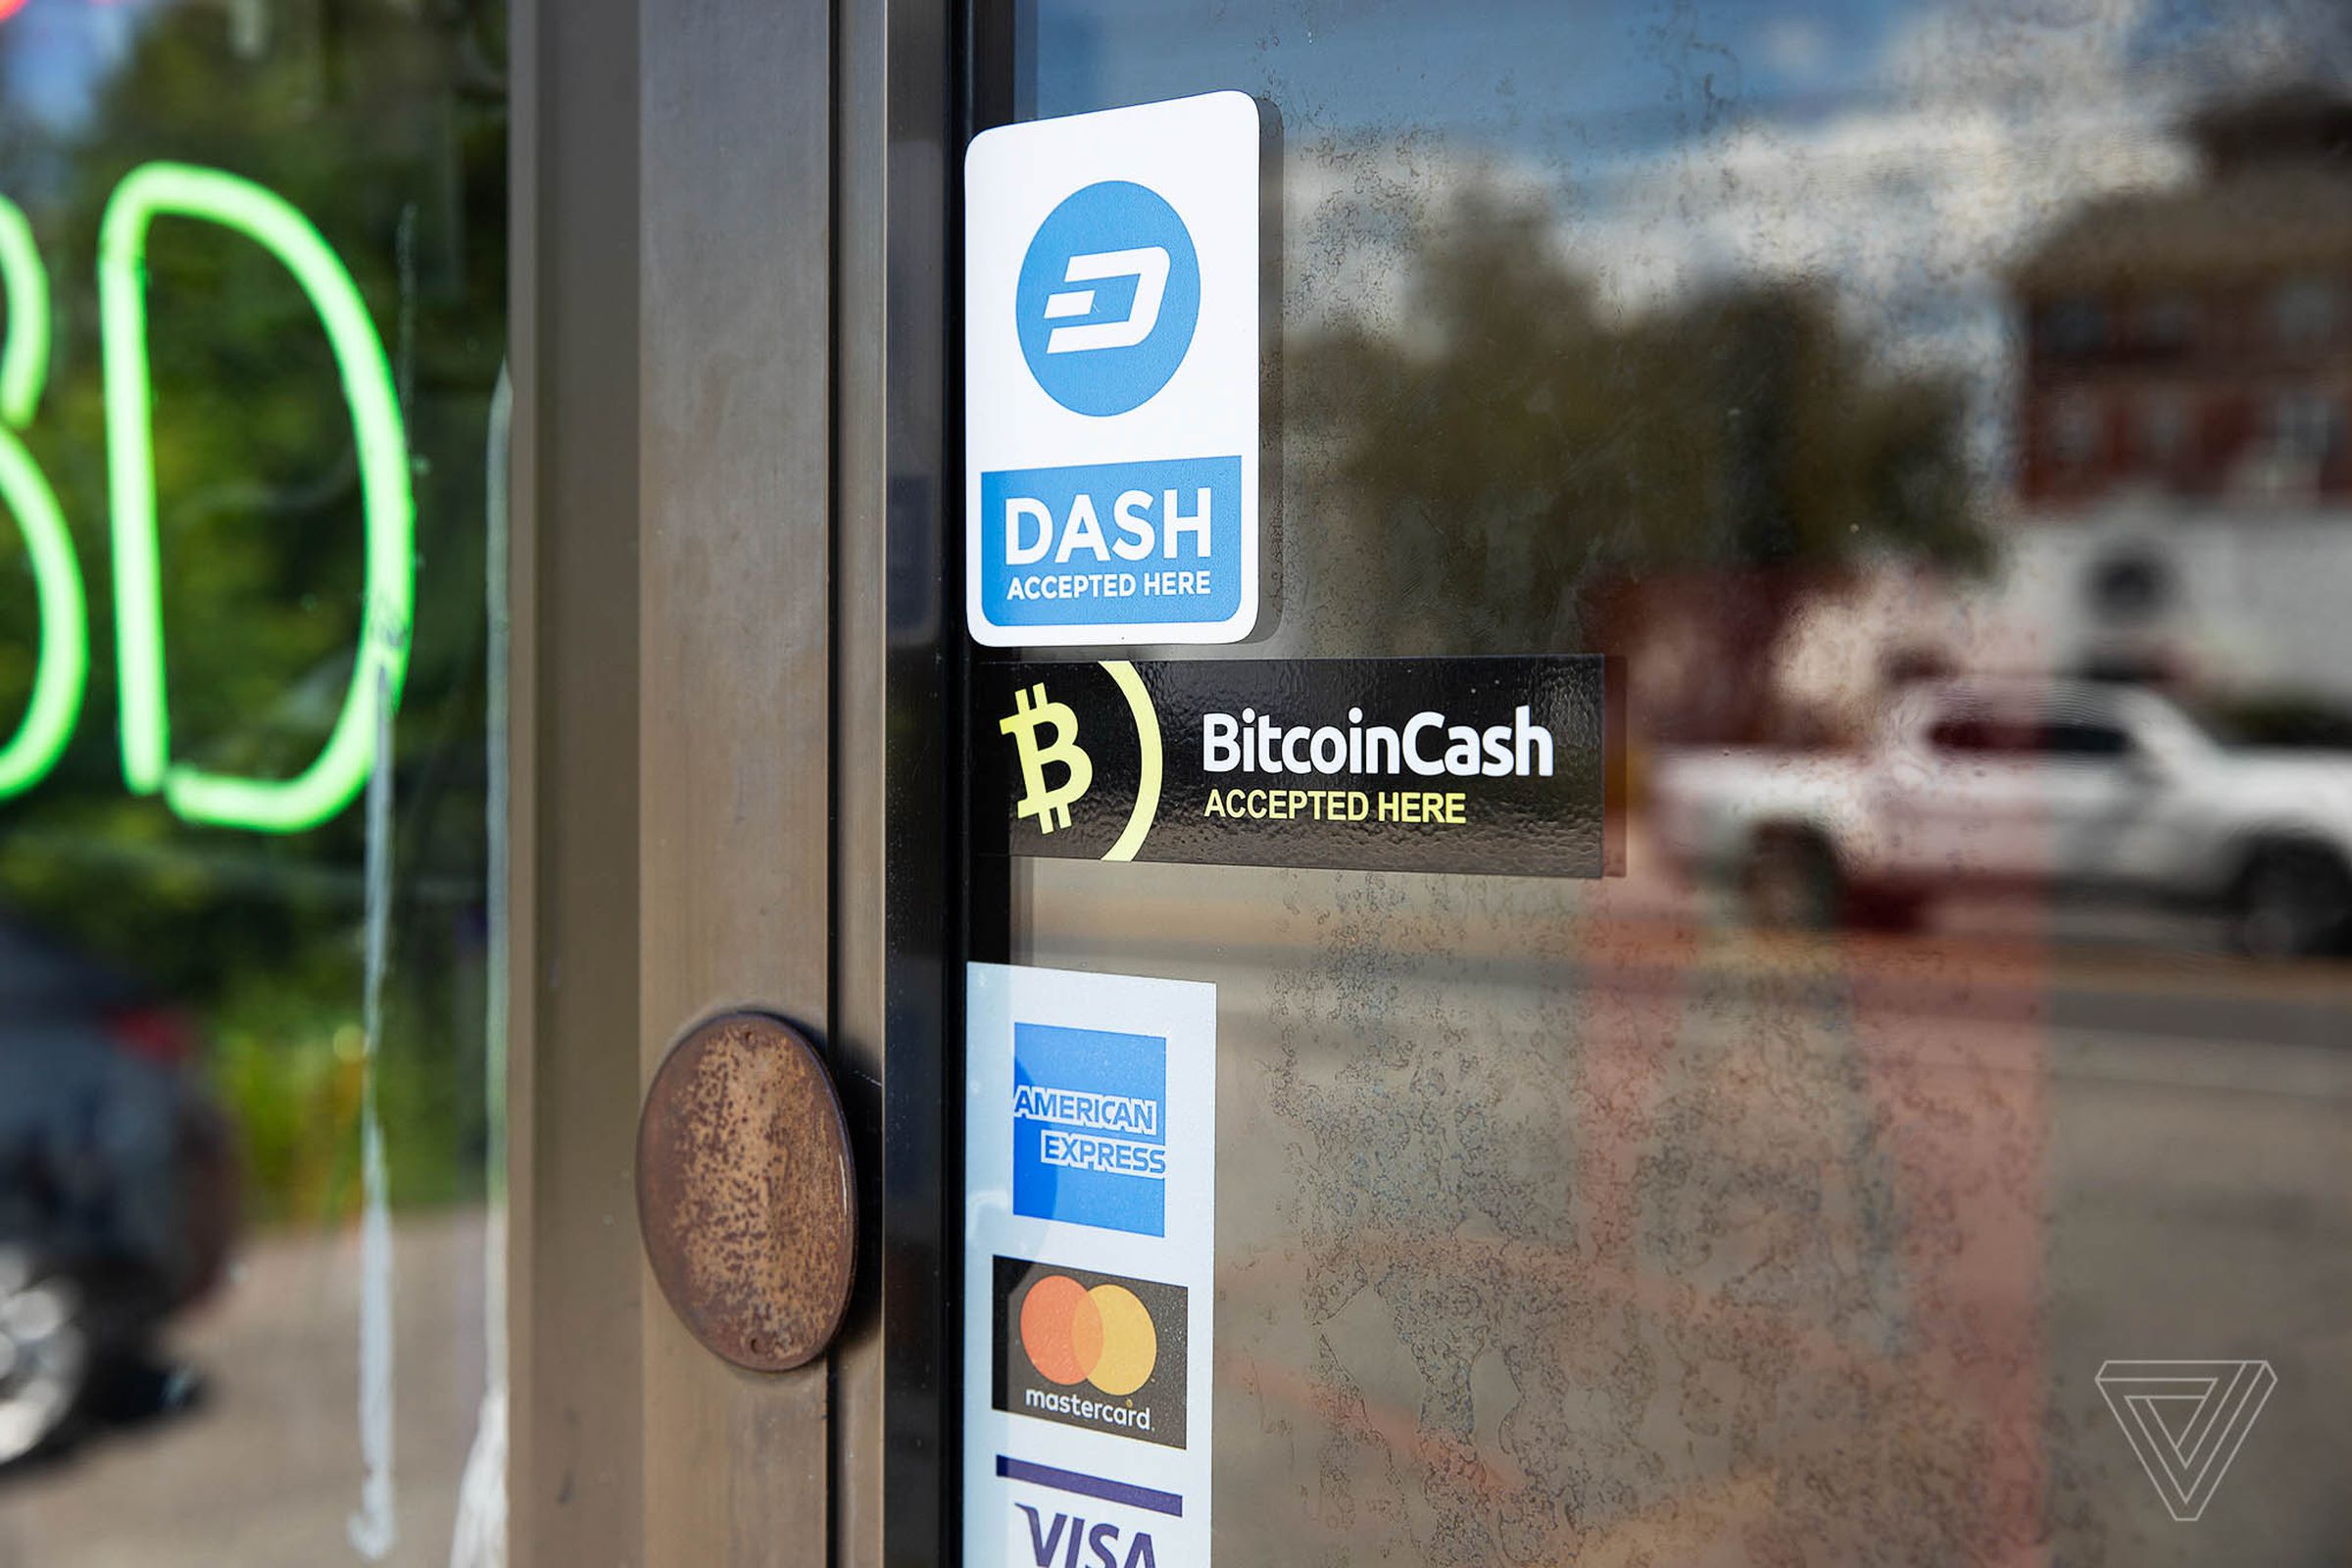 A Bitcoin Cash sticker remains on the door to the Campus Convenience store.